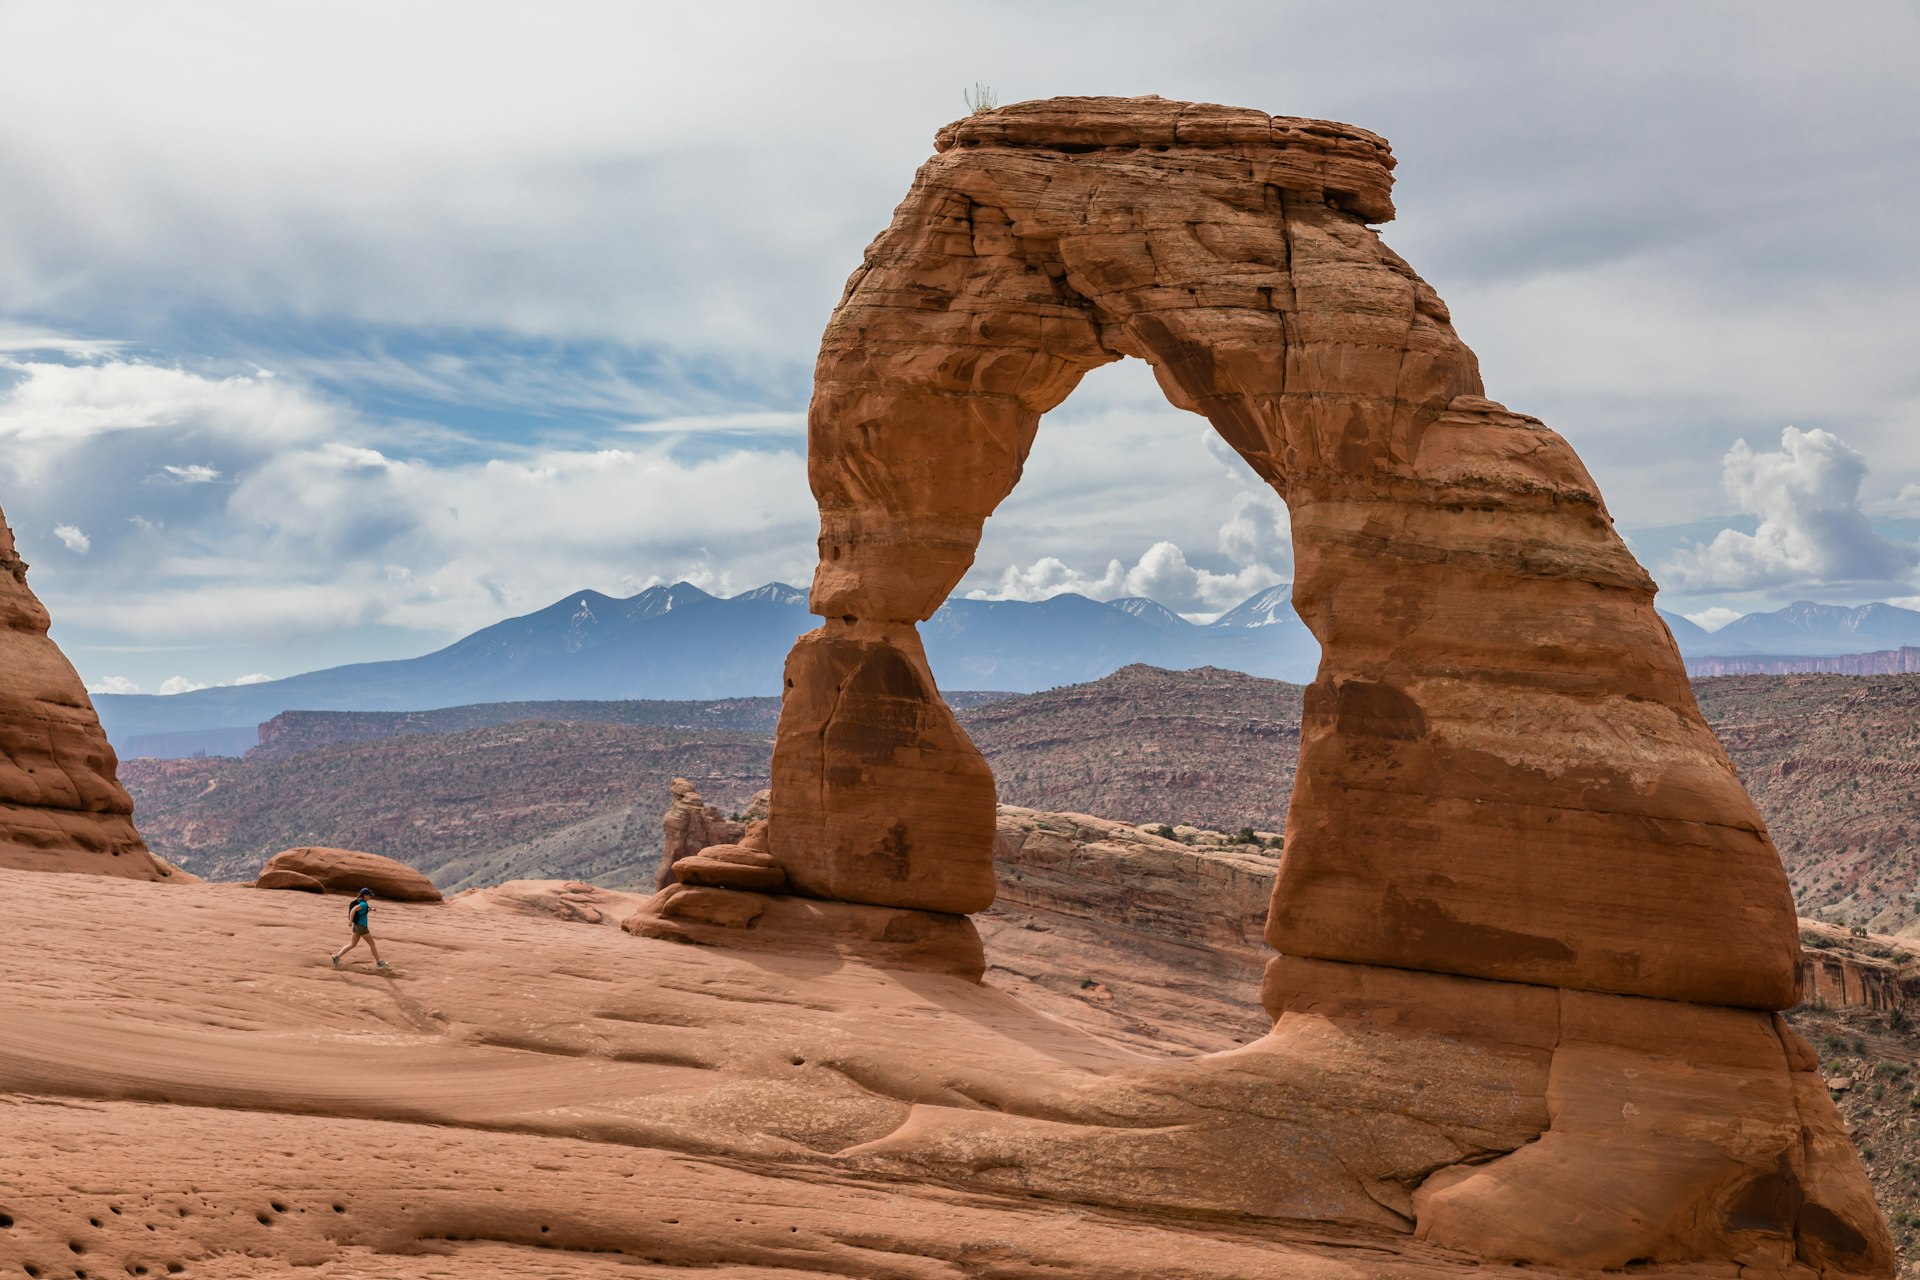 A person looks tiny in comparison to a vast archway of rock that towers above them